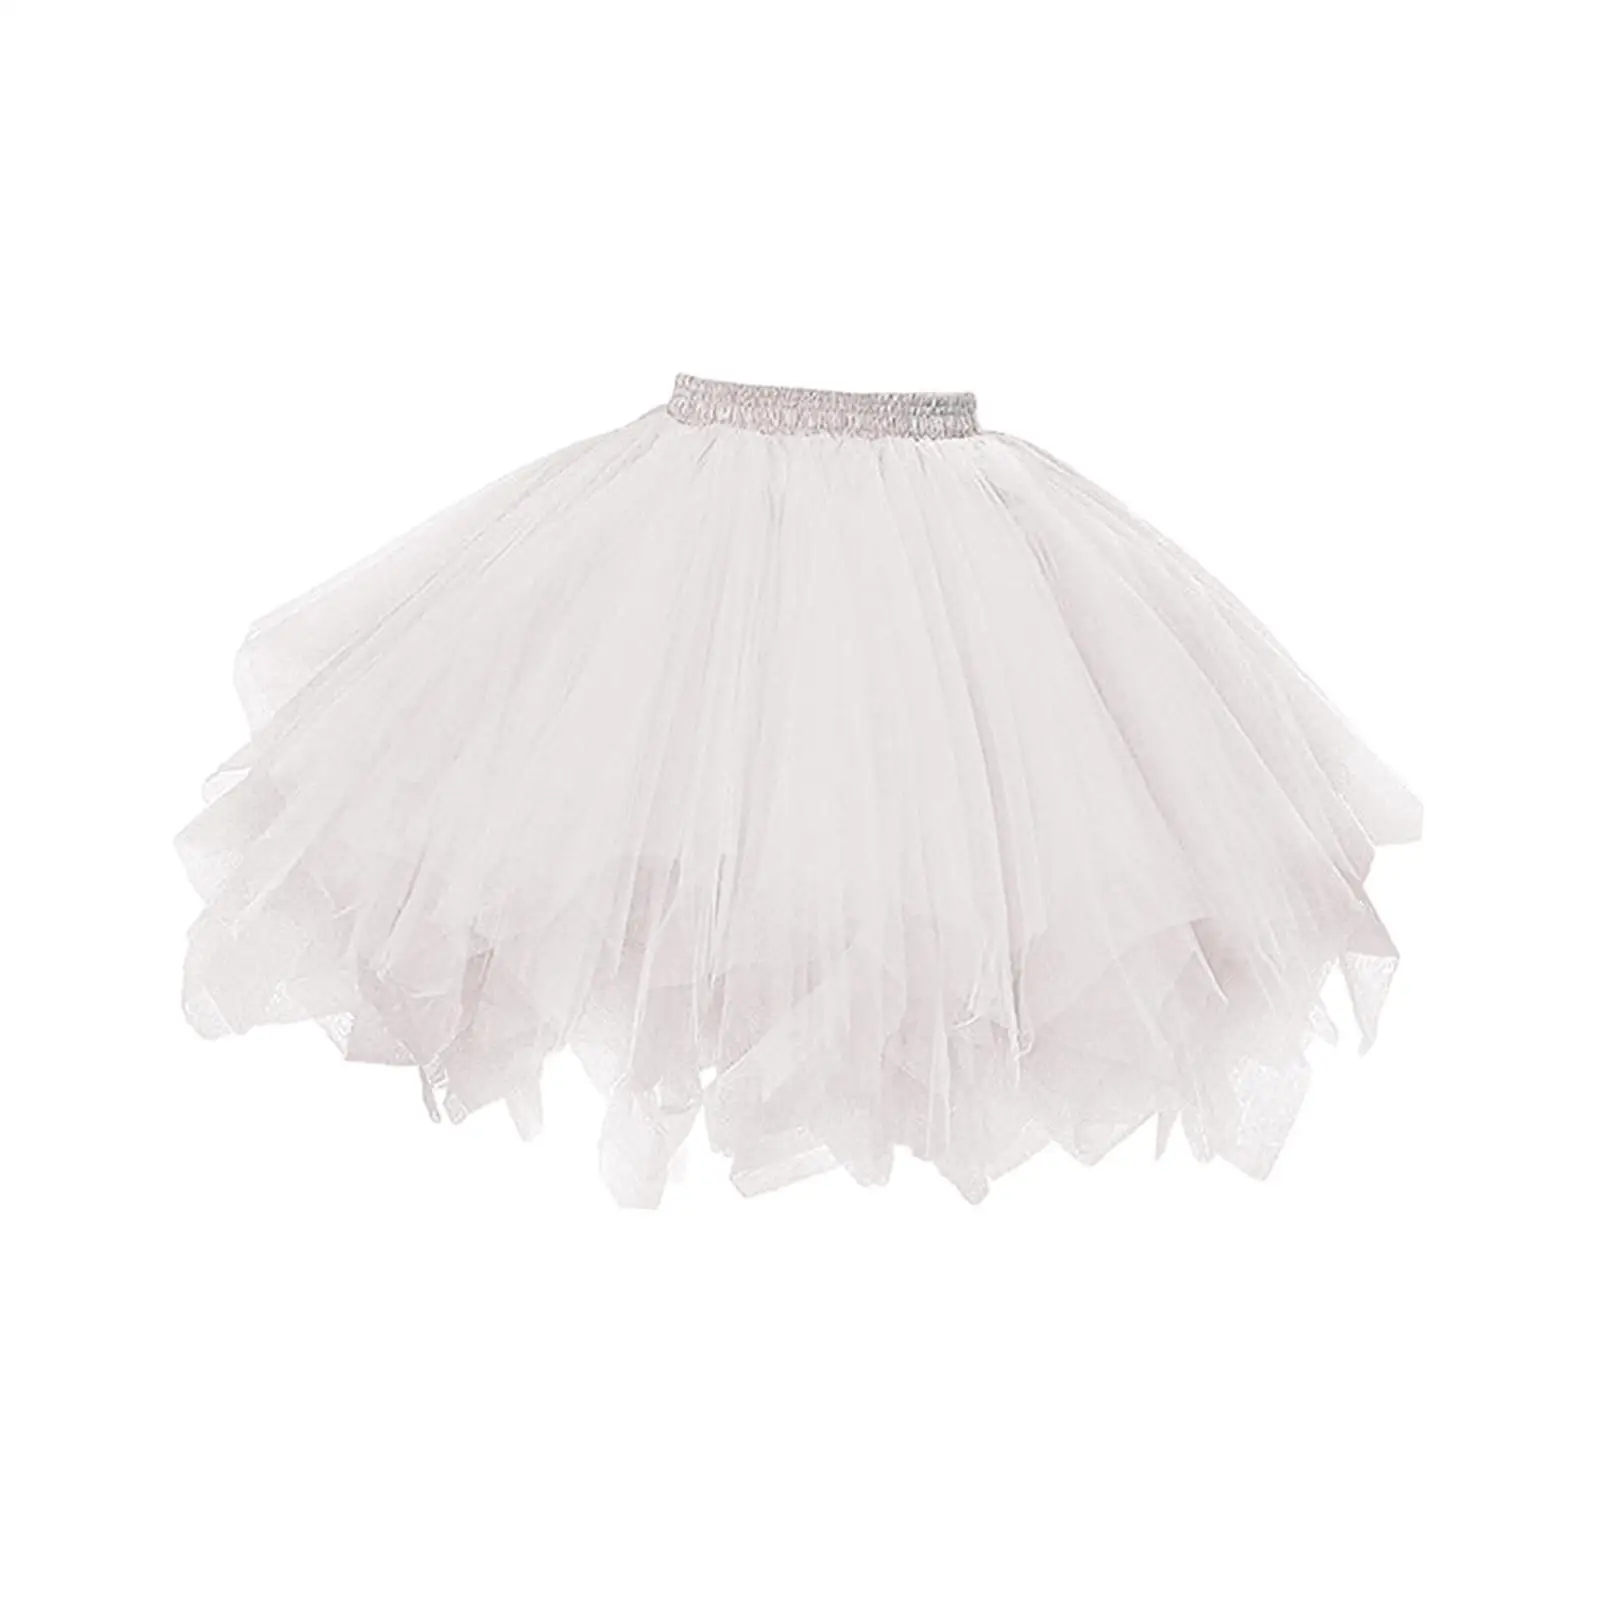 Tulle Petticoat Supplies Party Dress Up Adults Women Tulle Tutu Skirt Dress for Proms Beach Performance Night Club